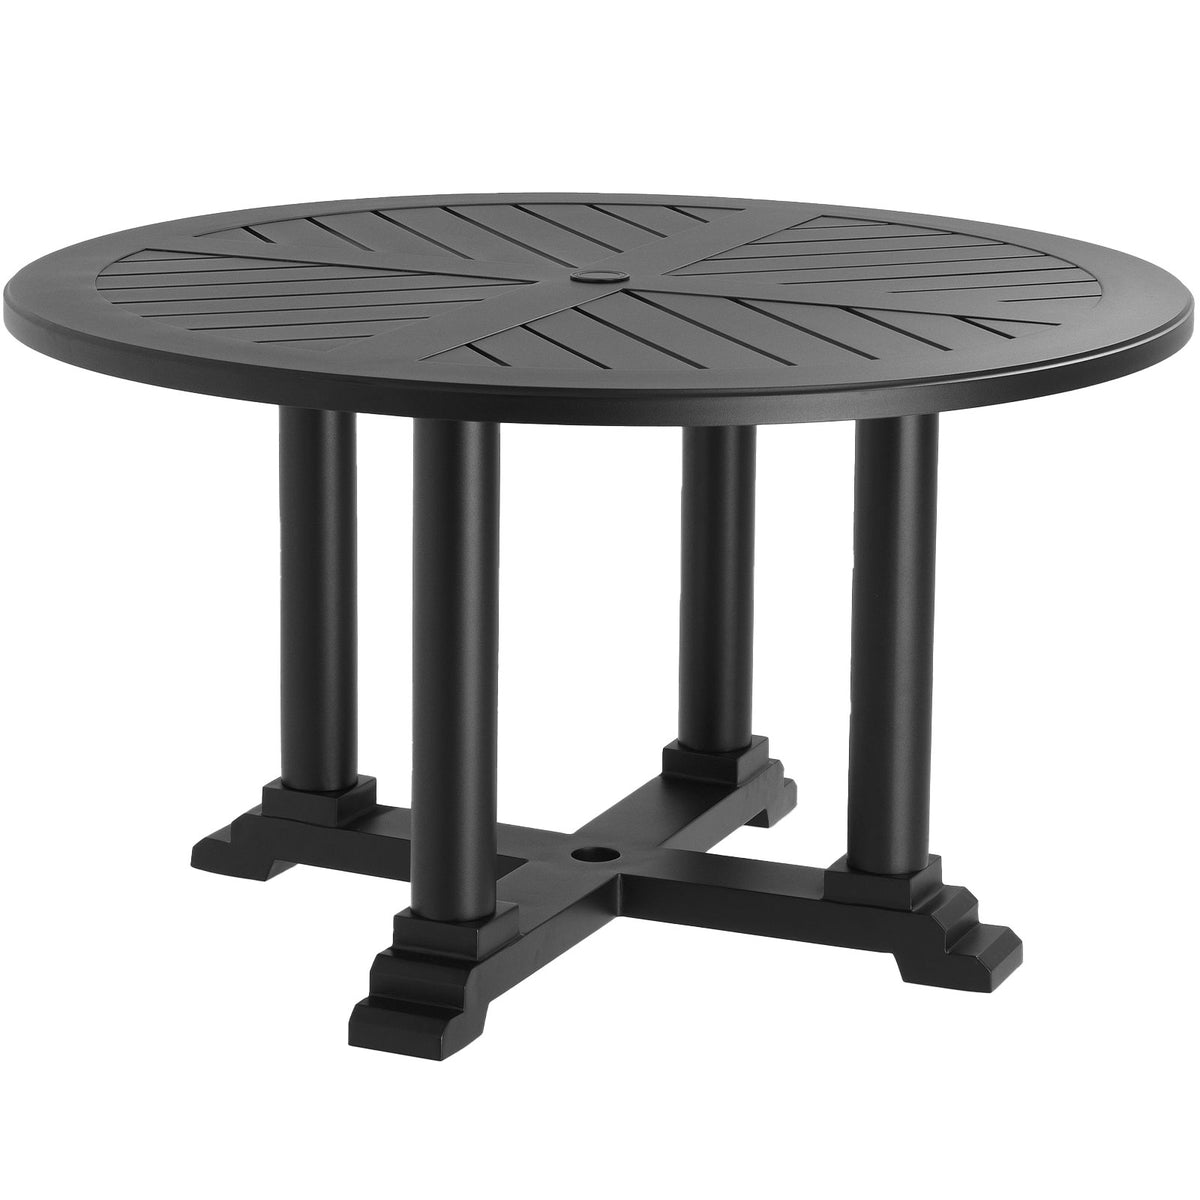 Bell Rive Round Outdoor Dining Table, Black